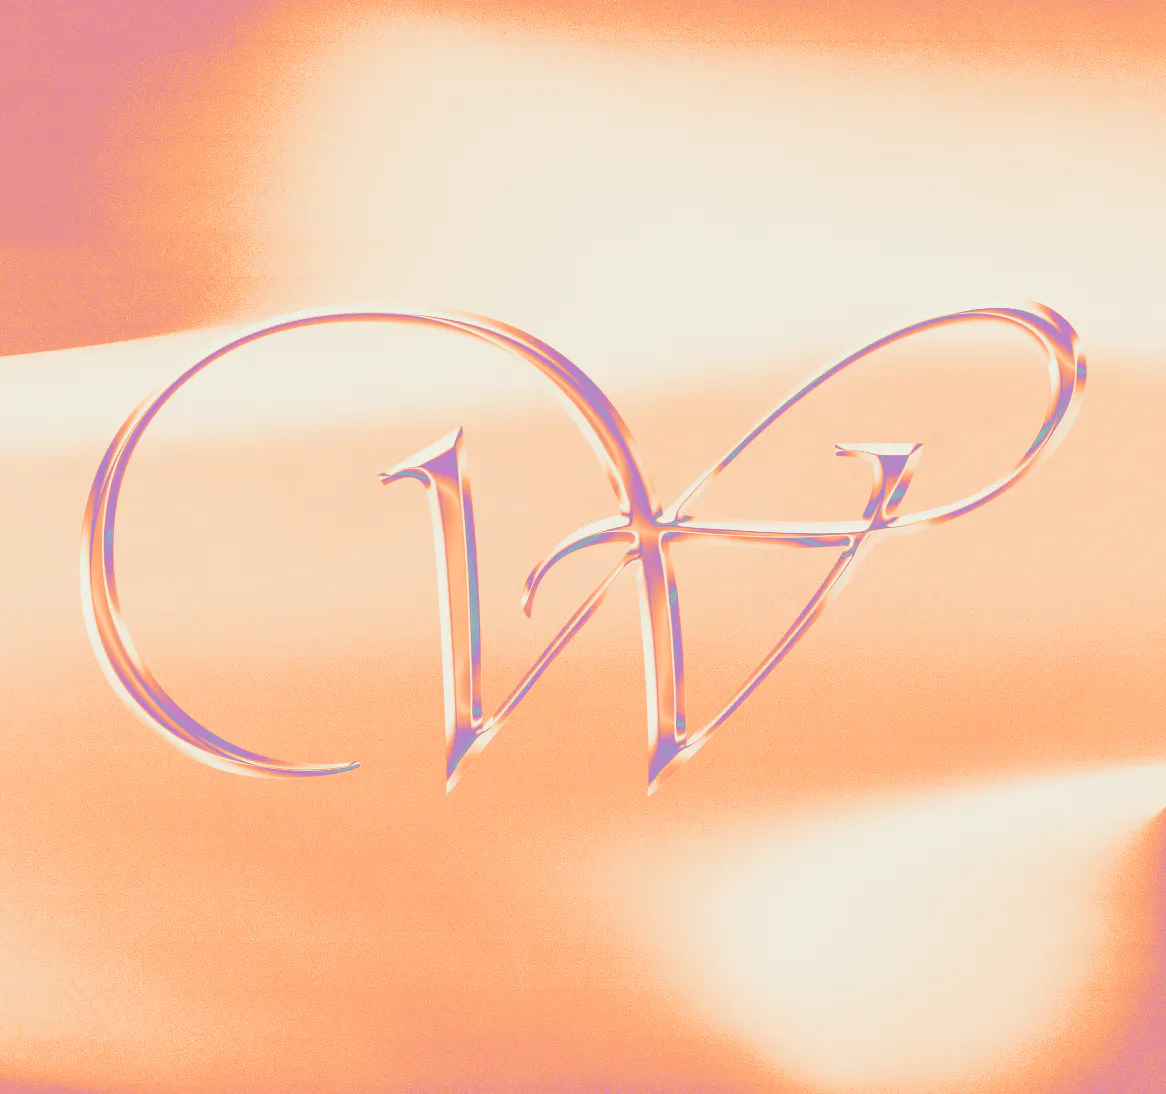 Chrome style letter W against ombre pink and orange background - Our Future Vision for Design Studios